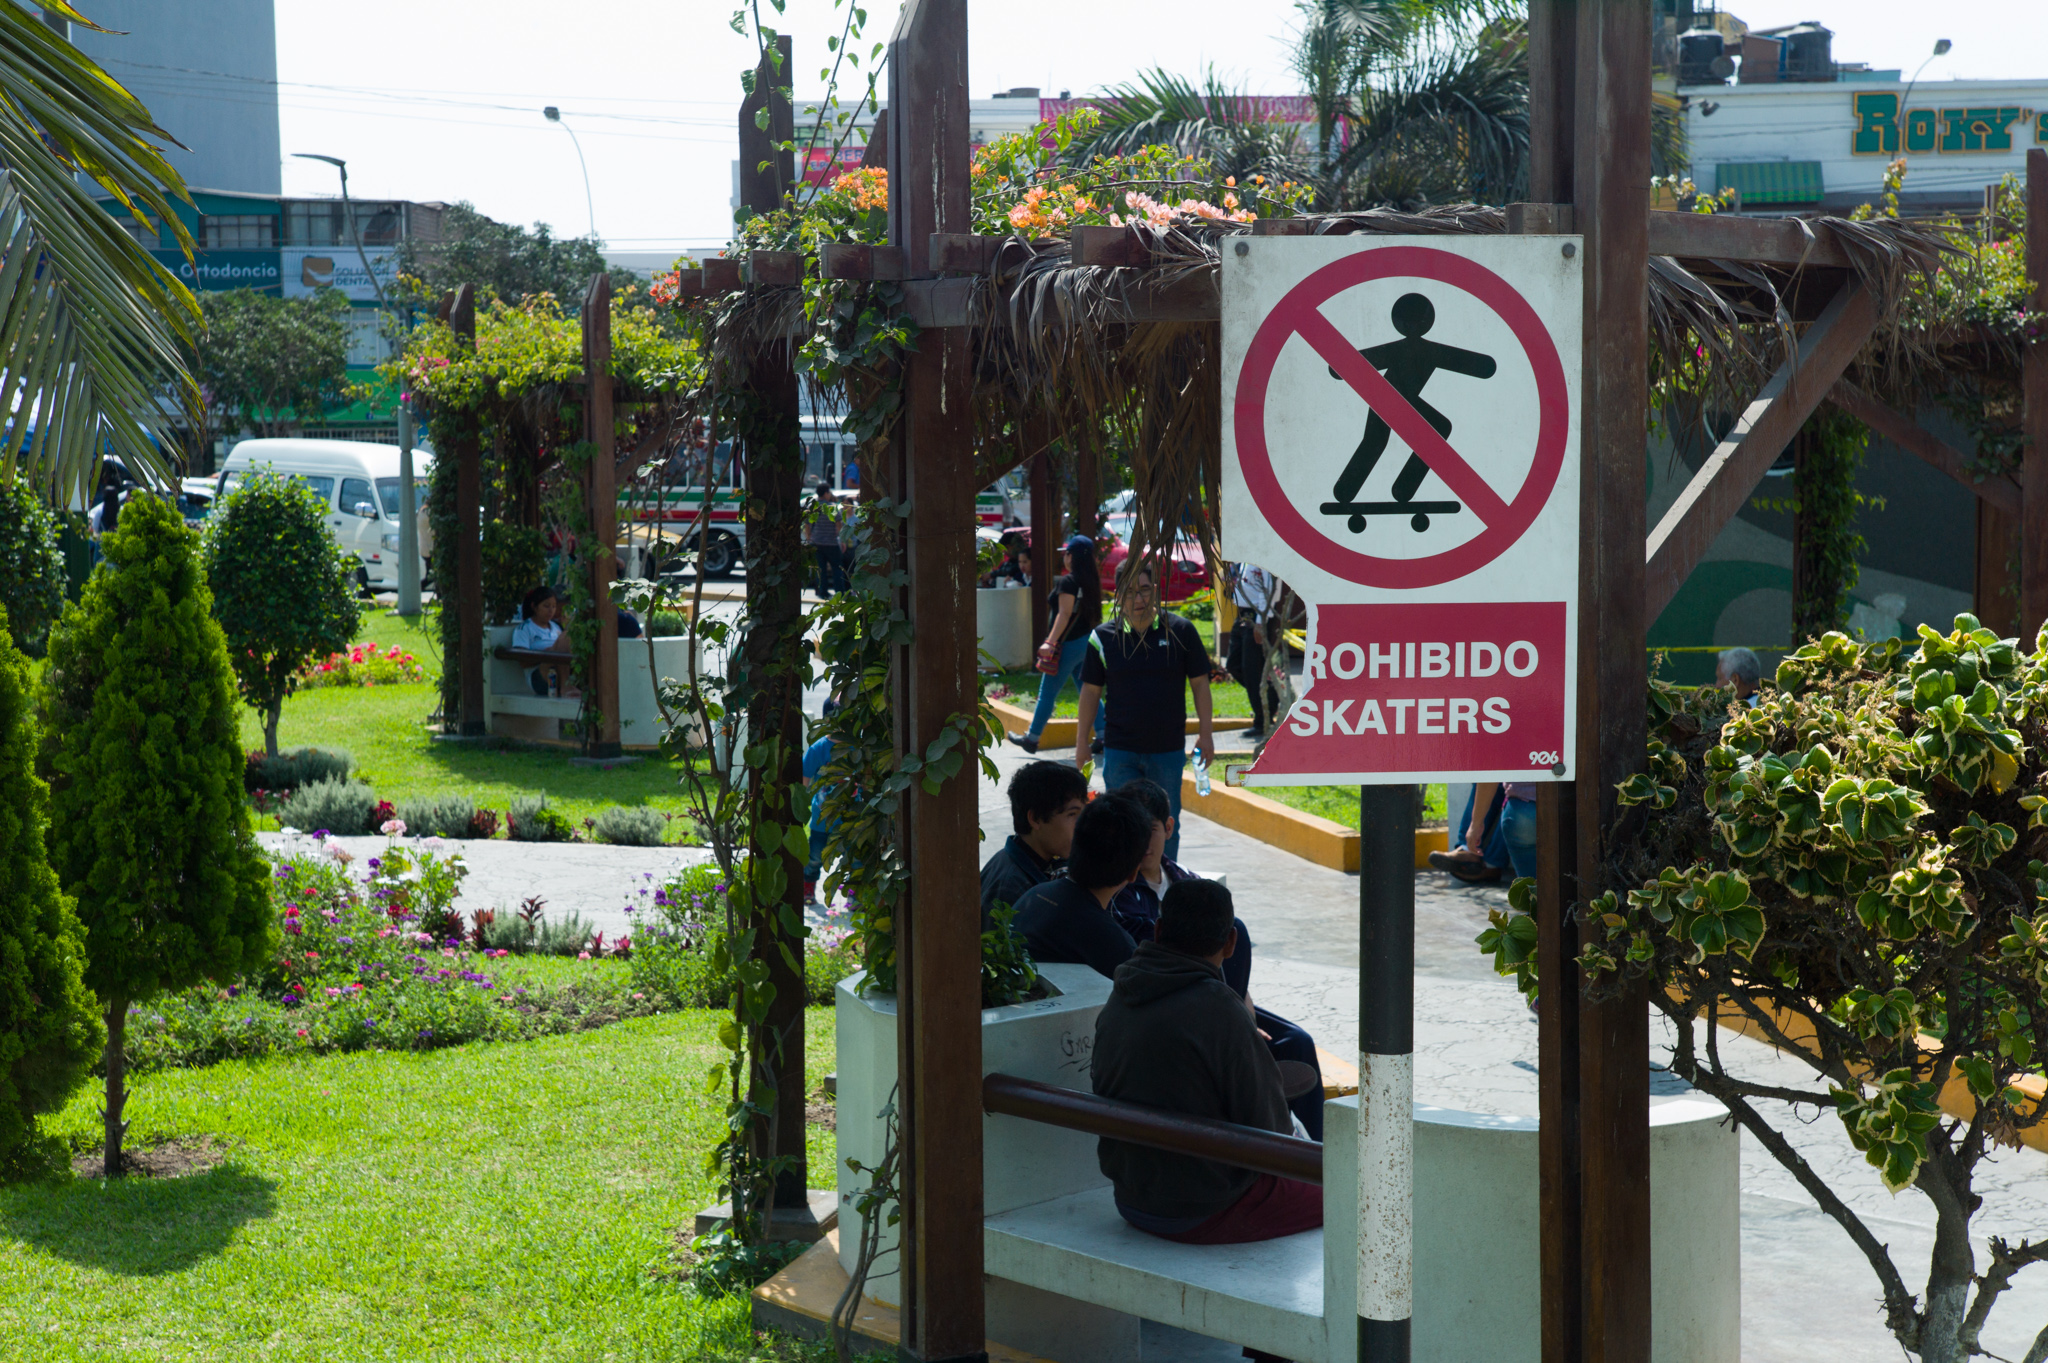  Main district plaza, adjacent to Los Olivos's municipality. "Skaters forbidden." 